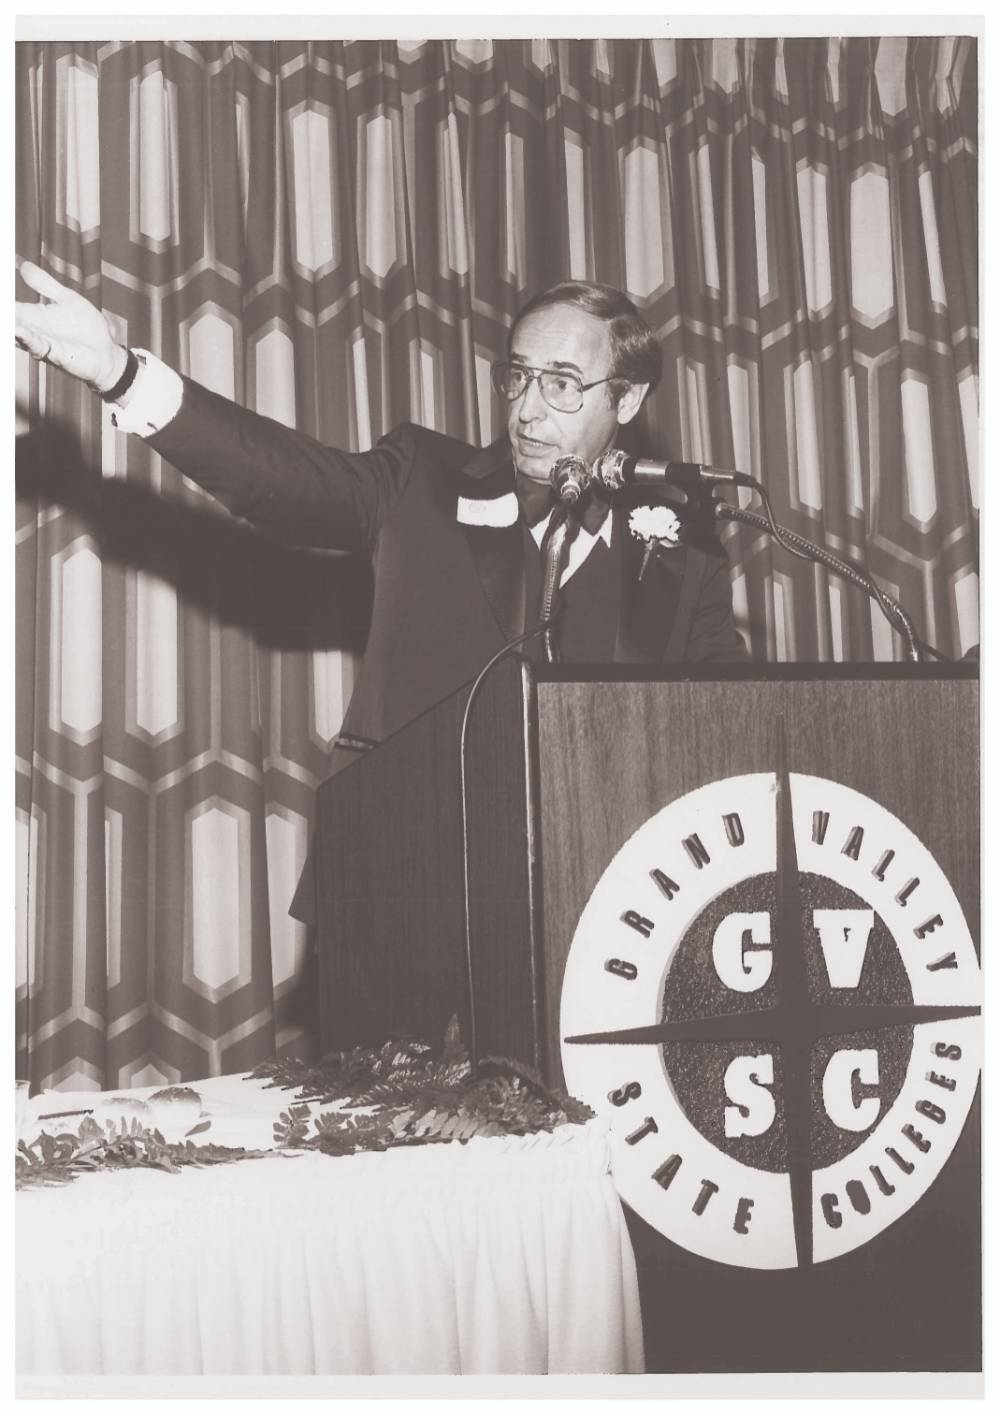 Richard DeVos standing at a podium speaking with his arm extended.